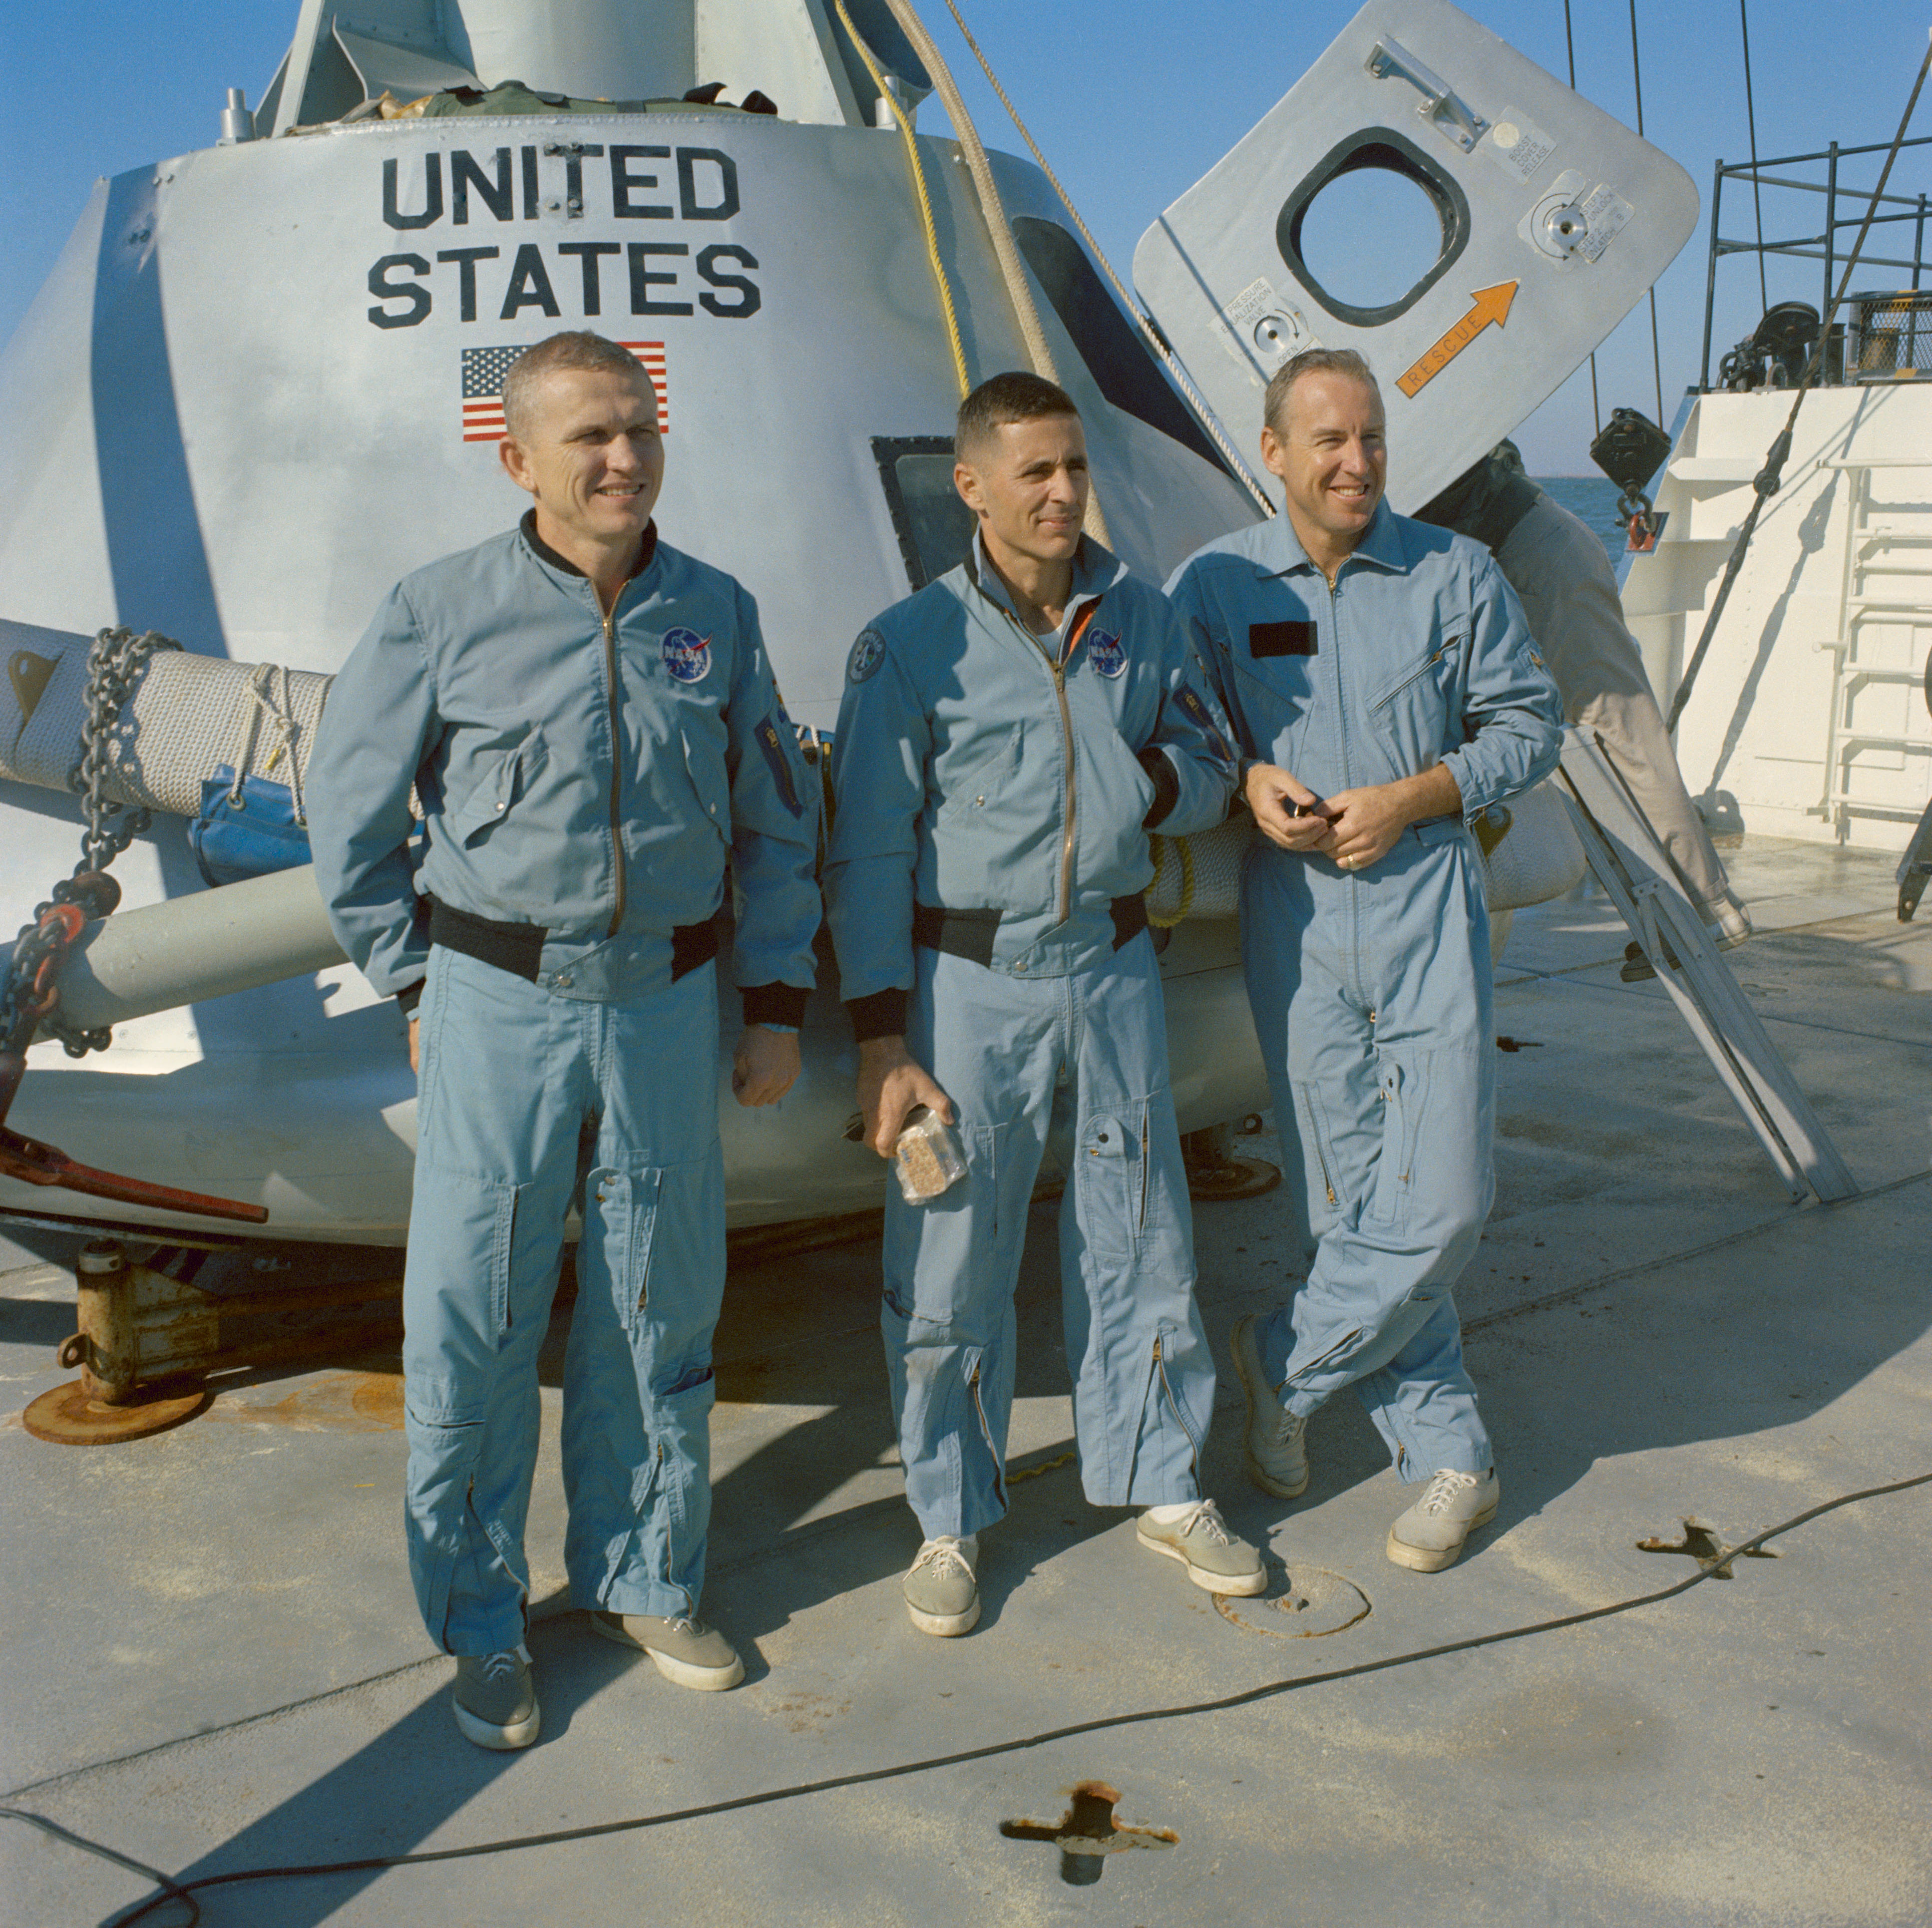 Apollo 8 astronauts Frank Borman, William A. Anders, and James A. Lovell on the deck of the M/V Retriever prepare for their water egress test